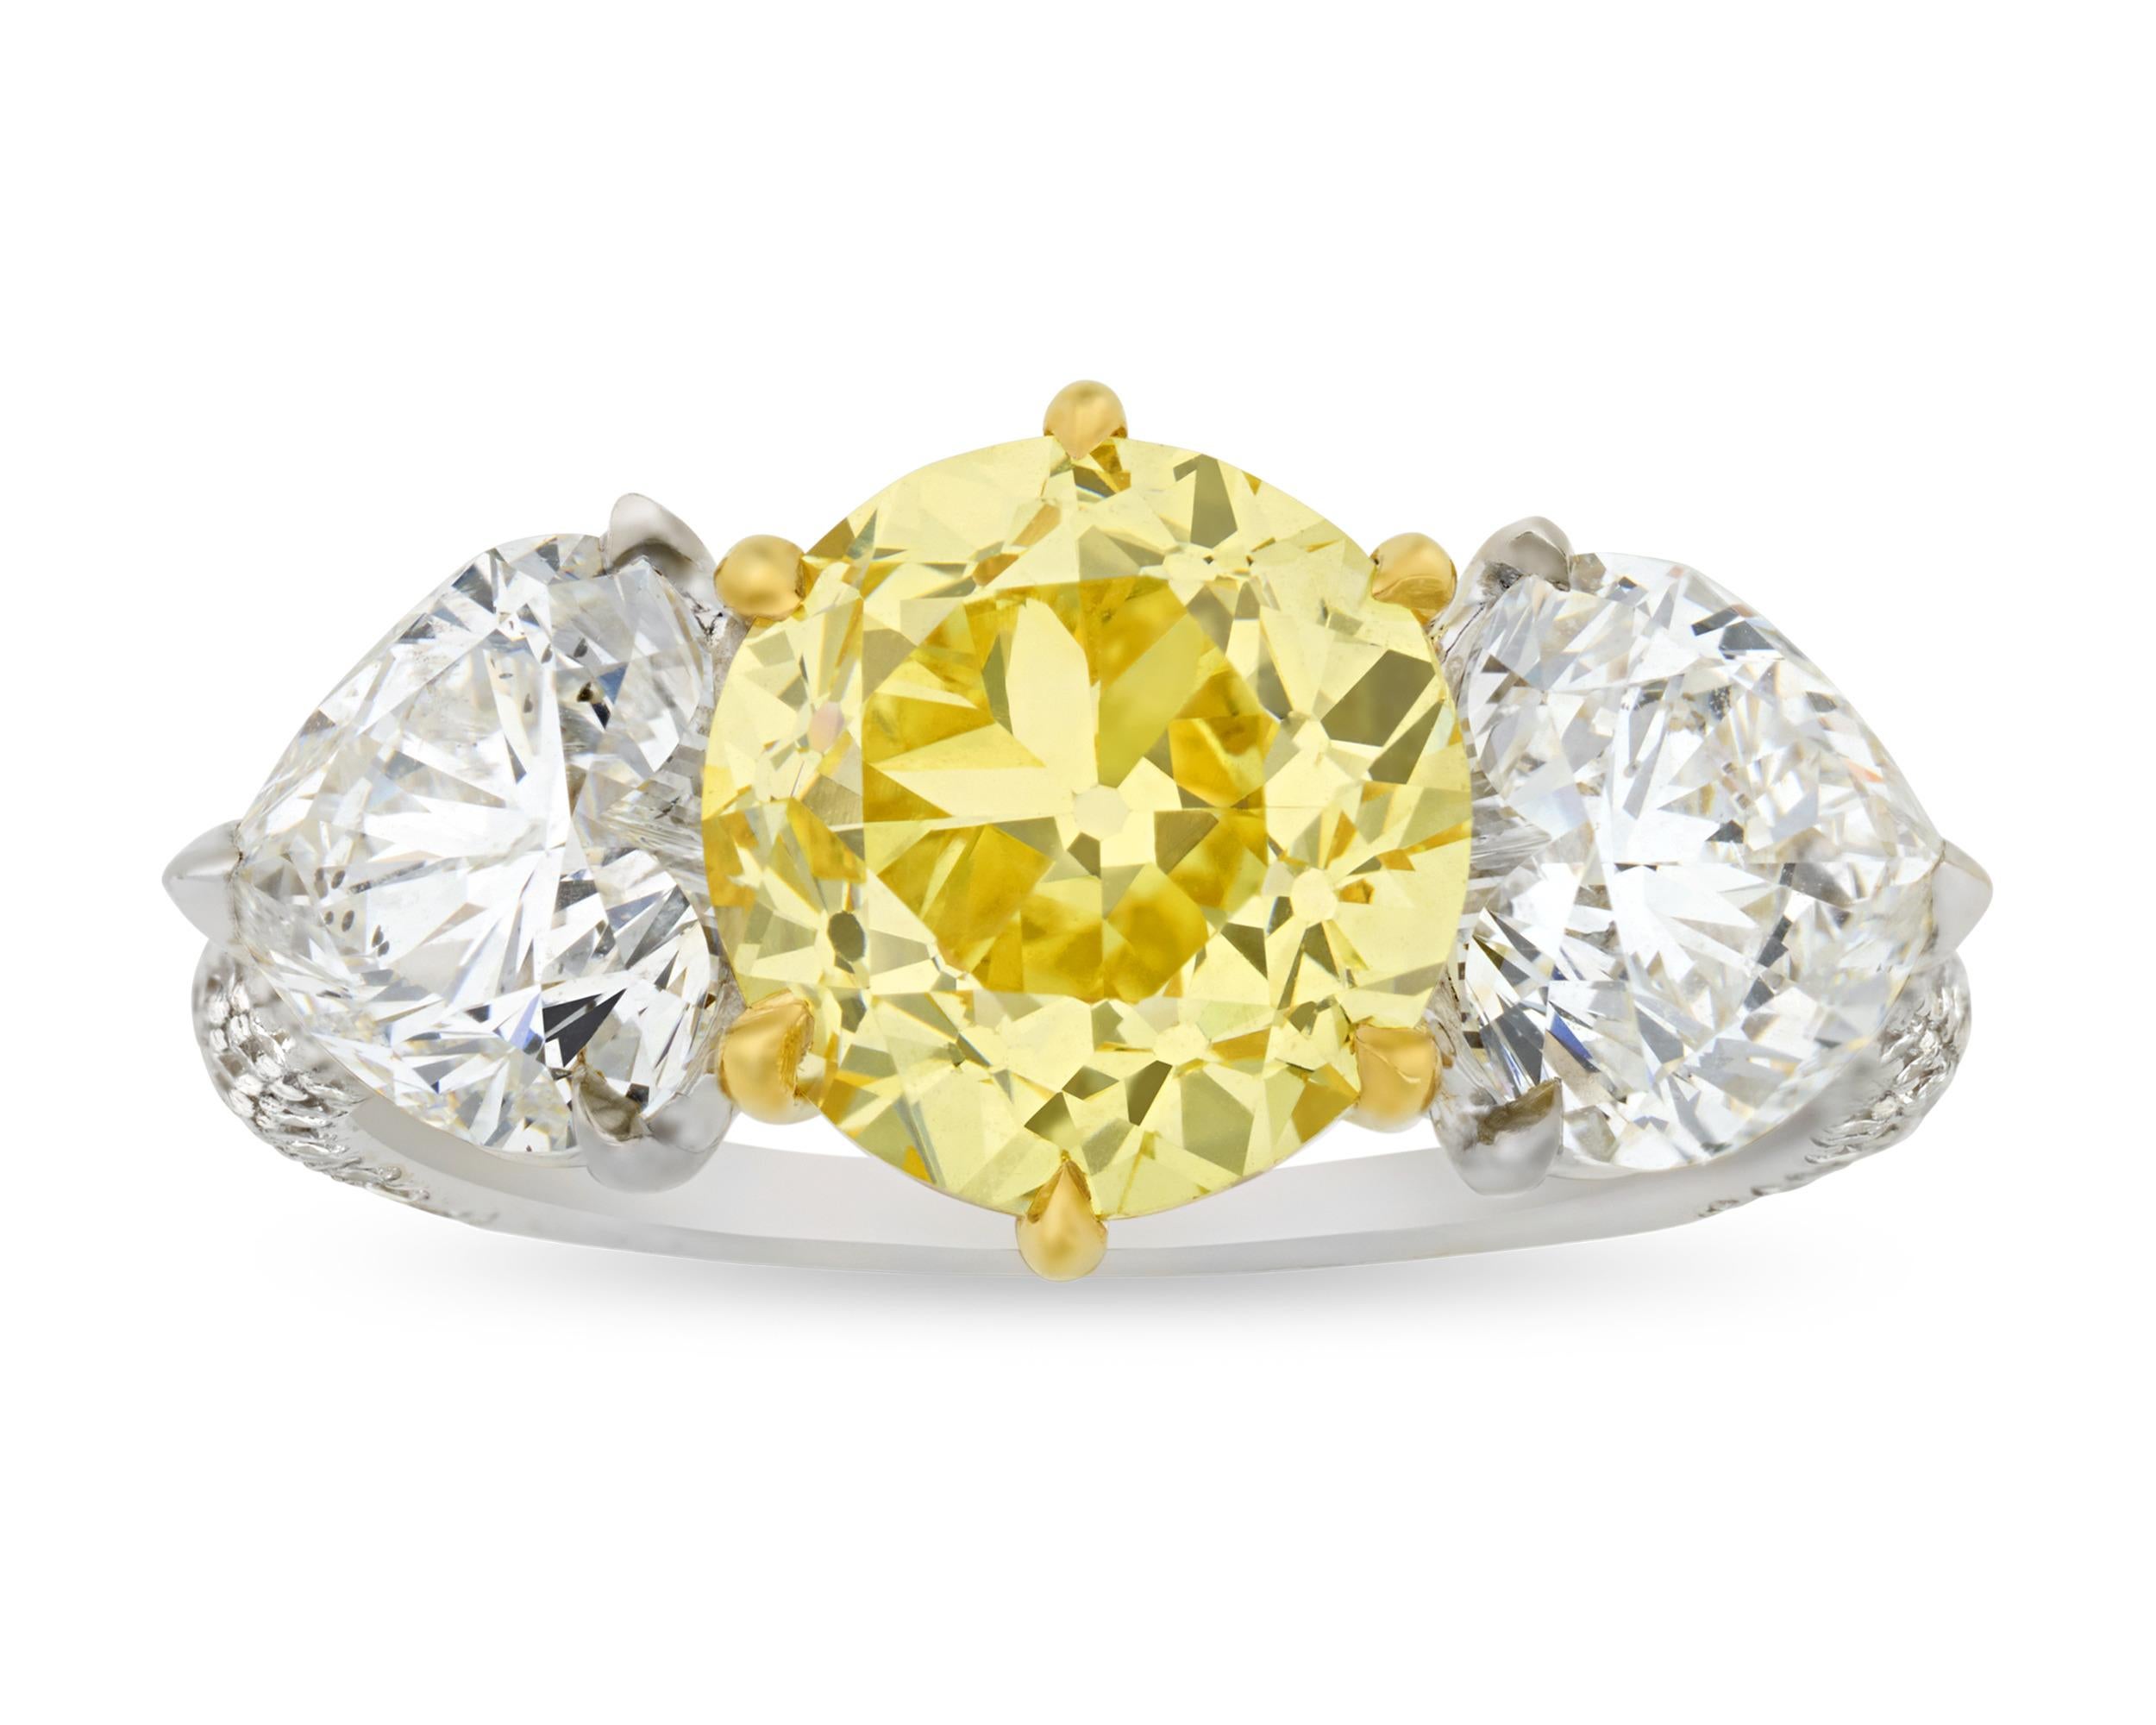 Fancy Intense Yellow Diamond Ring, 2.59 Carats In Excellent Condition For Sale In New Orleans, LA